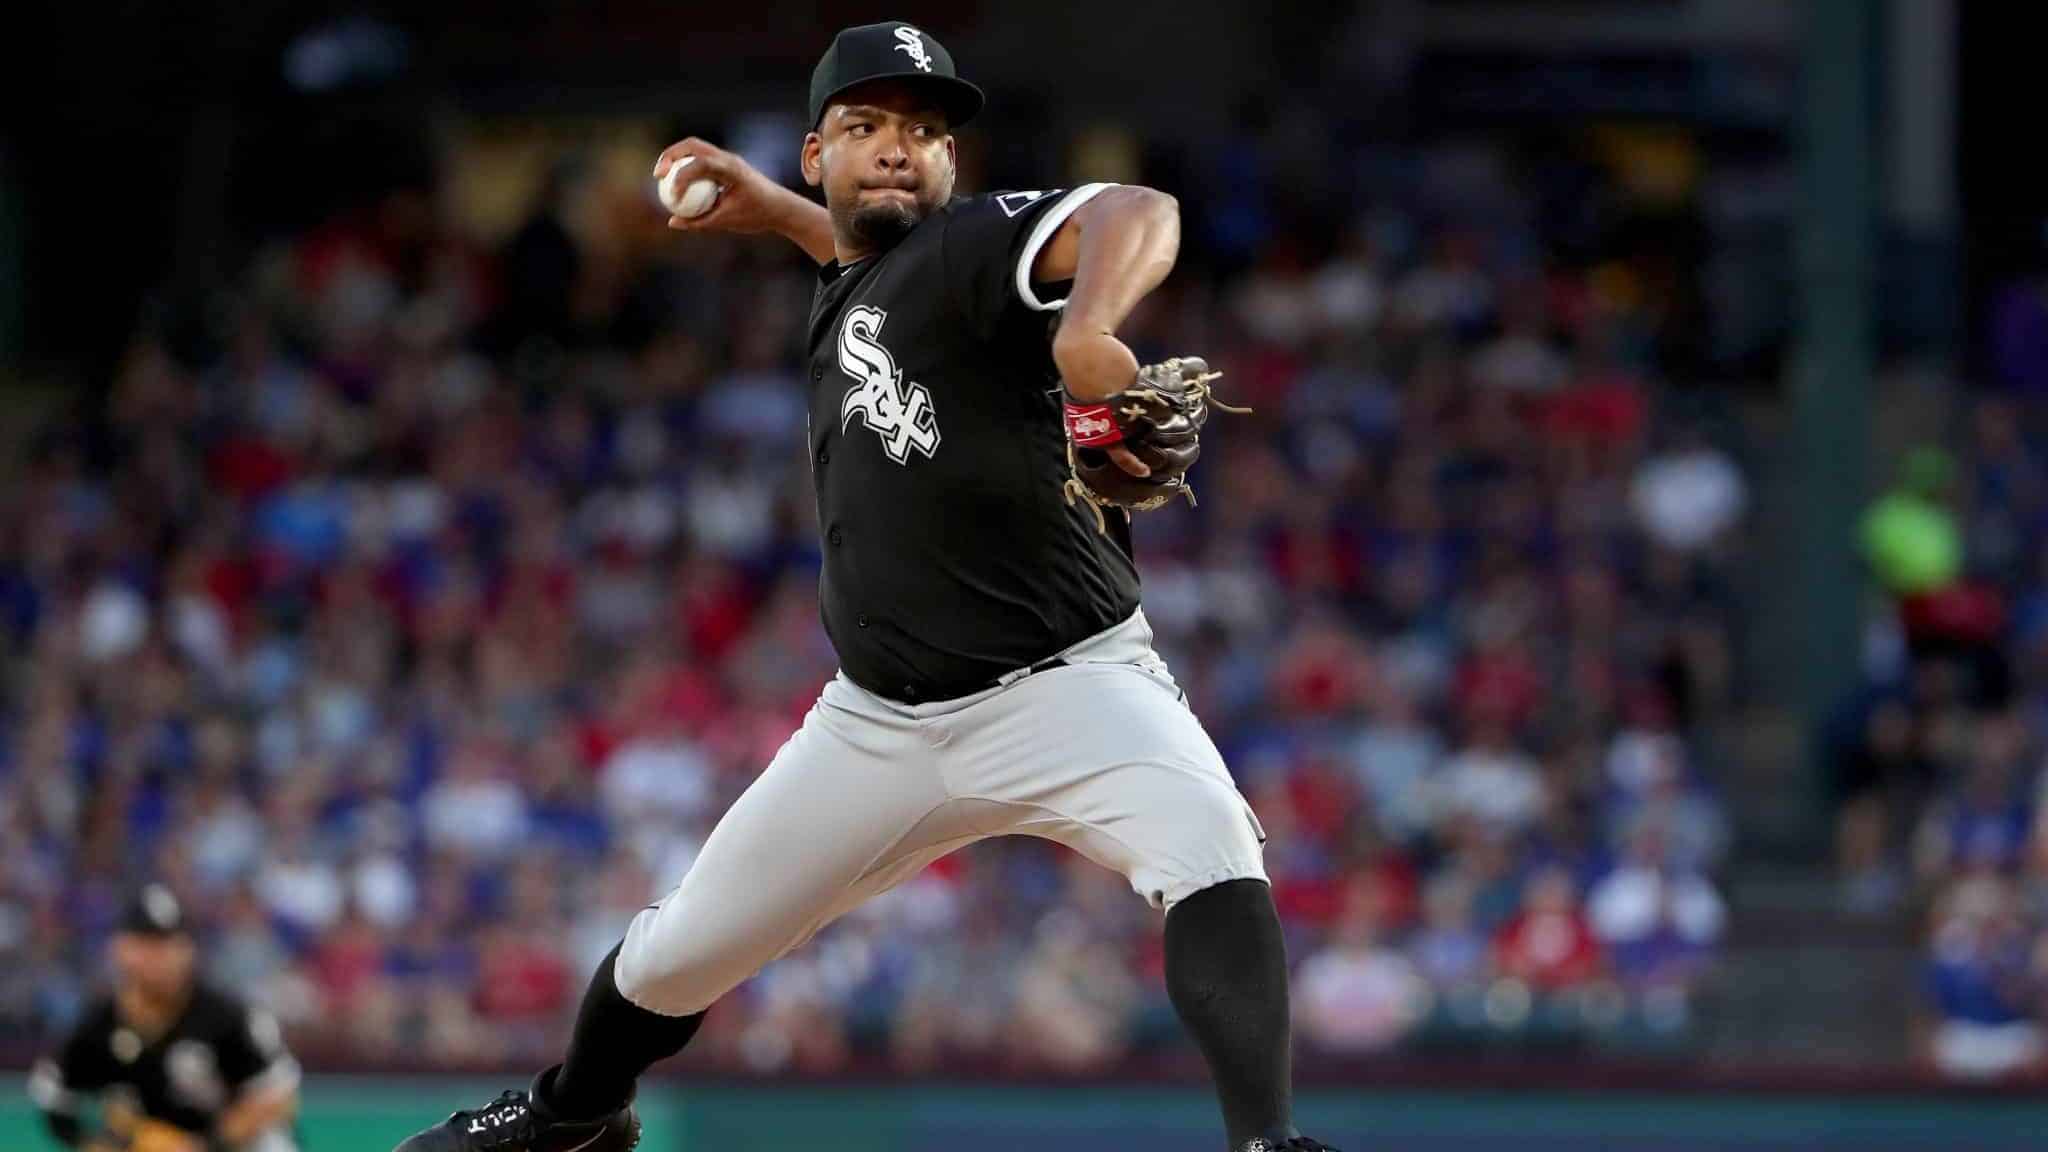 ARLINGTON, TEXAS - JUNE 22: Odrisamer Despaigne #25 of the Chicago White Sox pitches against the Texas Rangers in the bottom of the first inning at Globe Life Park in Arlington on June 22, 2019 in Arlington, Texas.